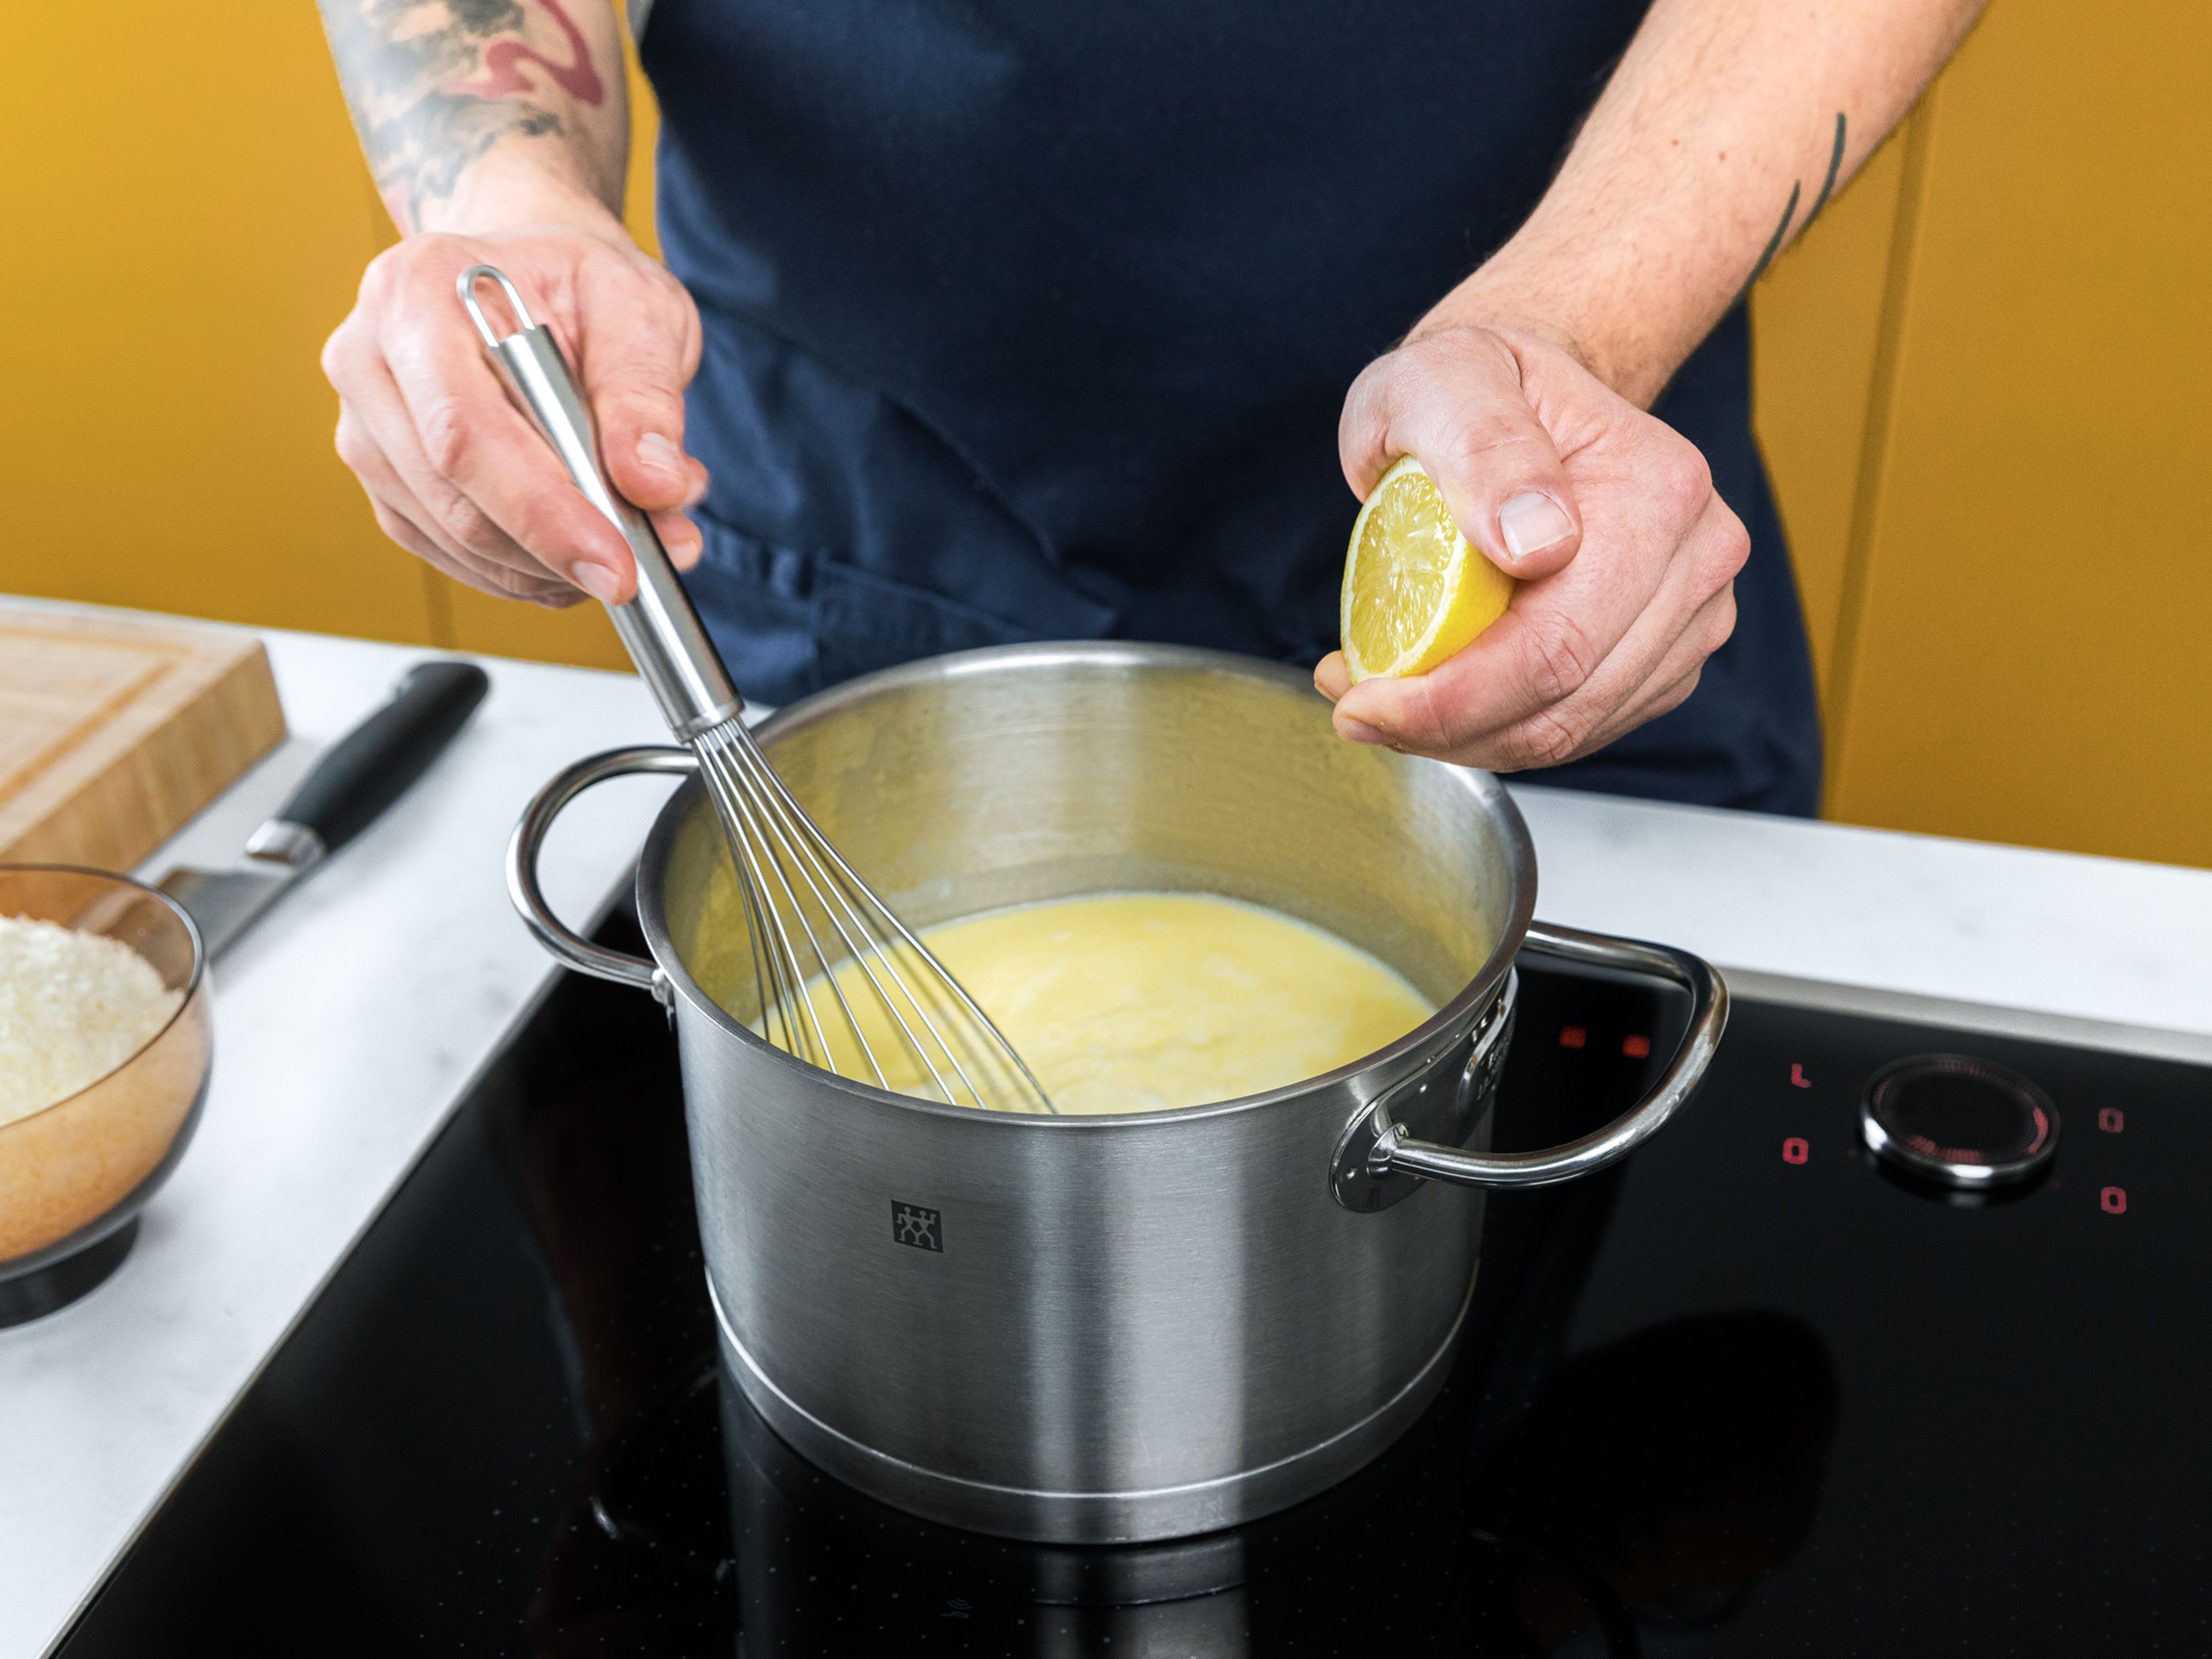 For the béchamel sauce, melt butter in a small saucepan. Add flour and, stirring constantly, add the milk and juice from a lemon, until you have a smooth mixture. Stir in salt, nutmeg, and white pepper. Reduce heat and let simmer for approx. 10 min. Stir several times.